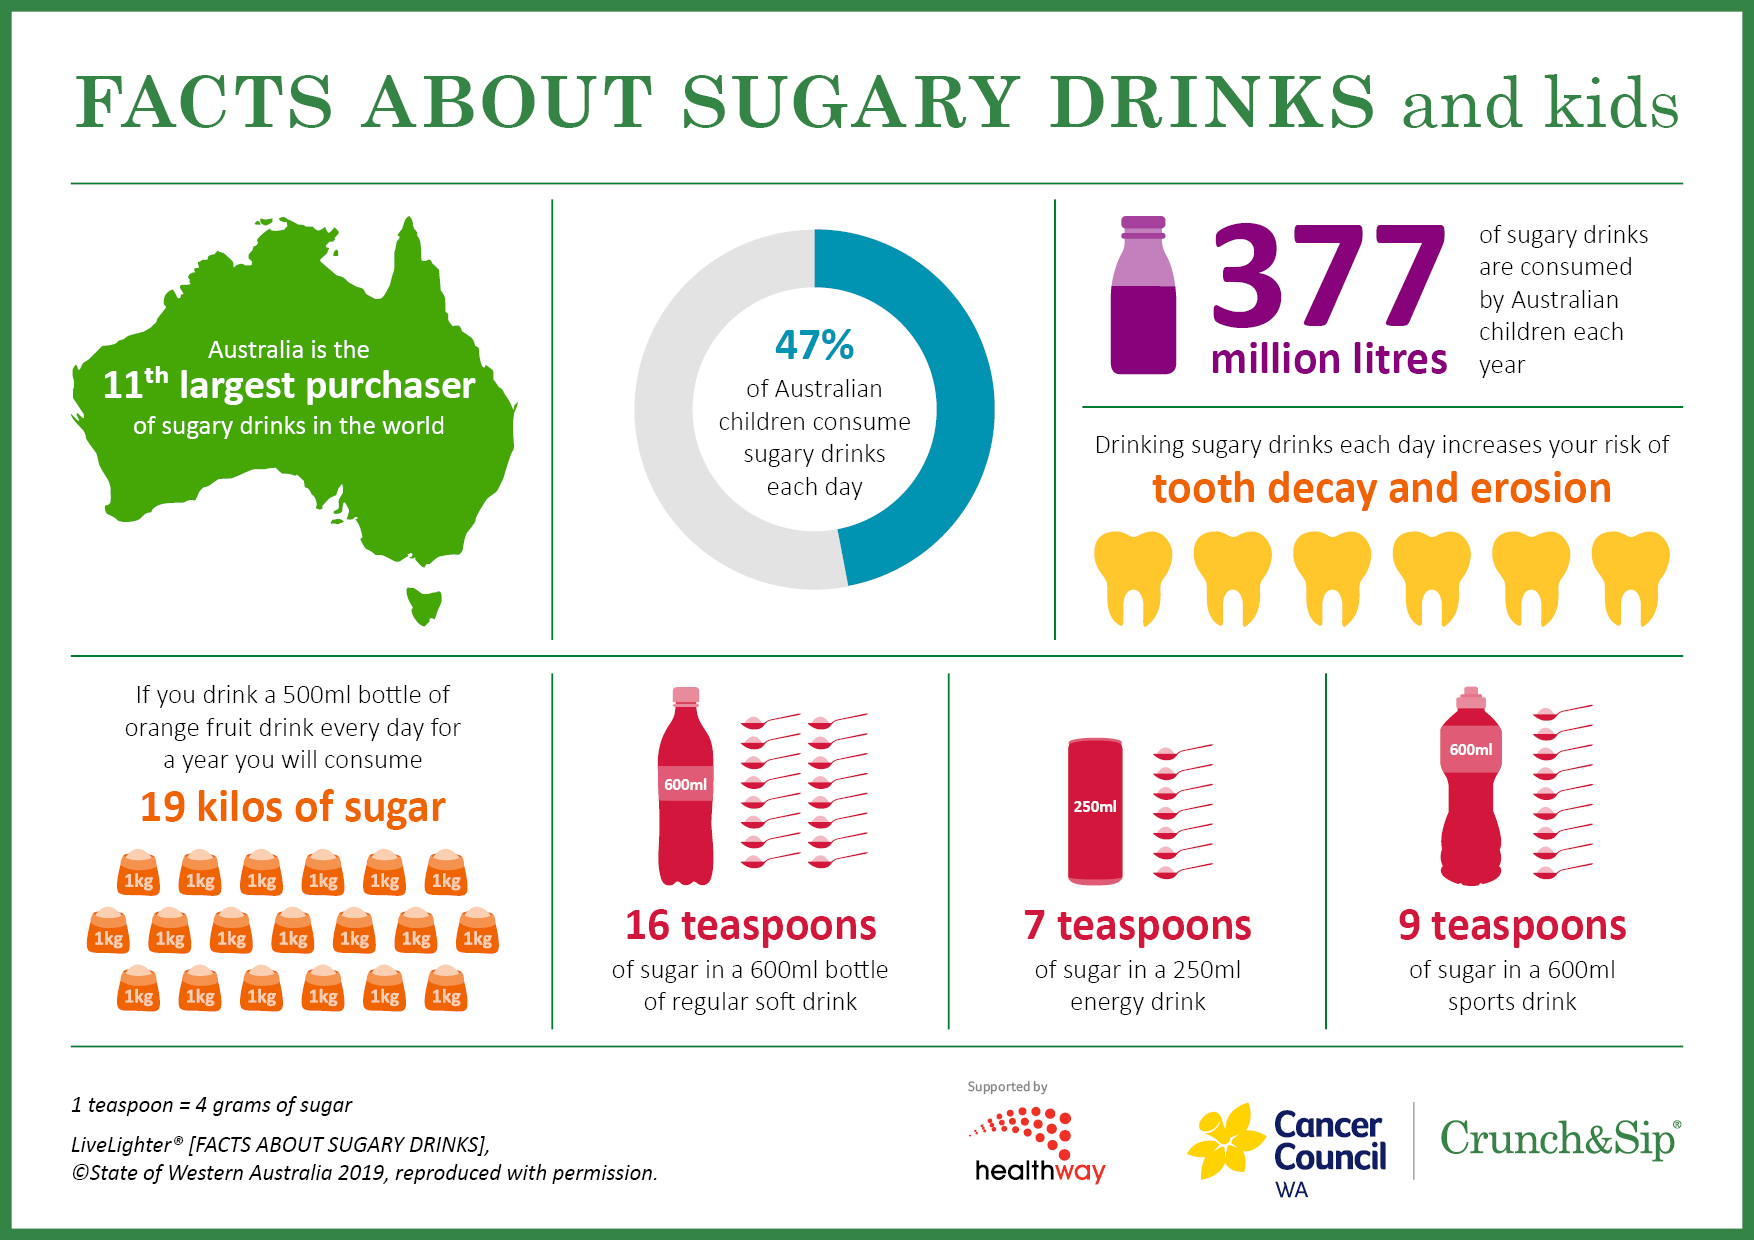 Crunch&Sip sugary drinks infographic